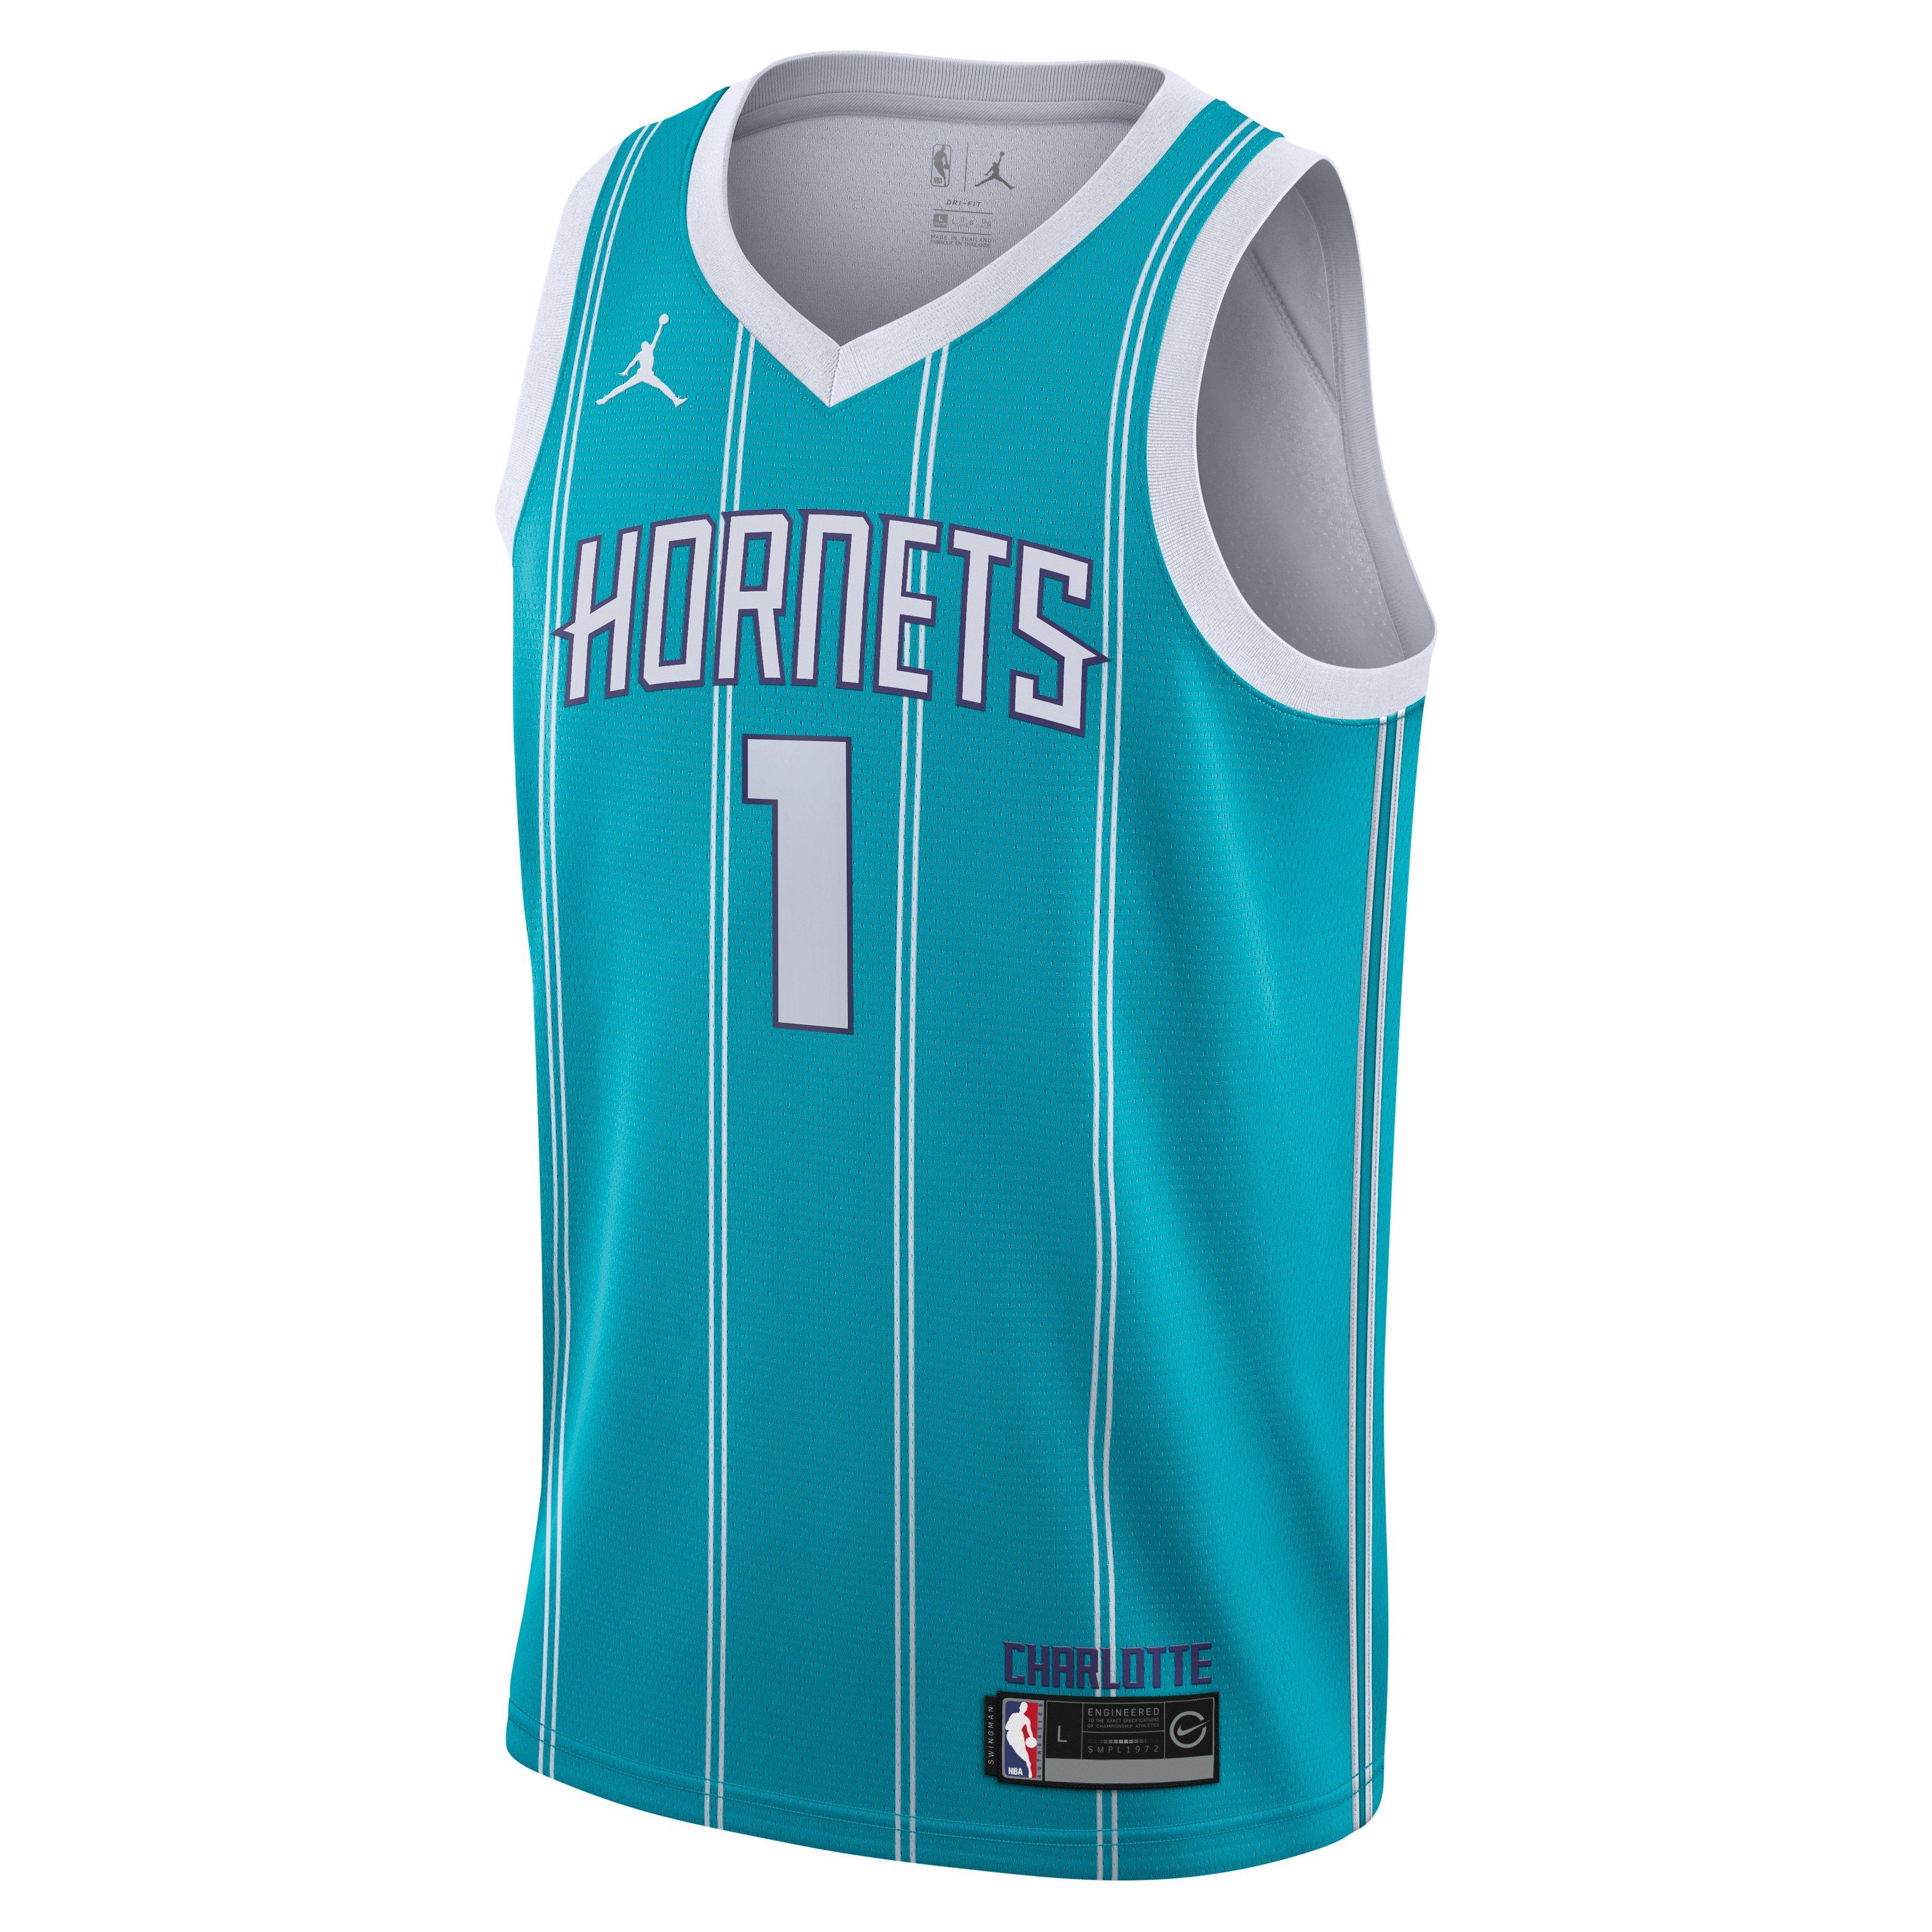 hornets old jersey